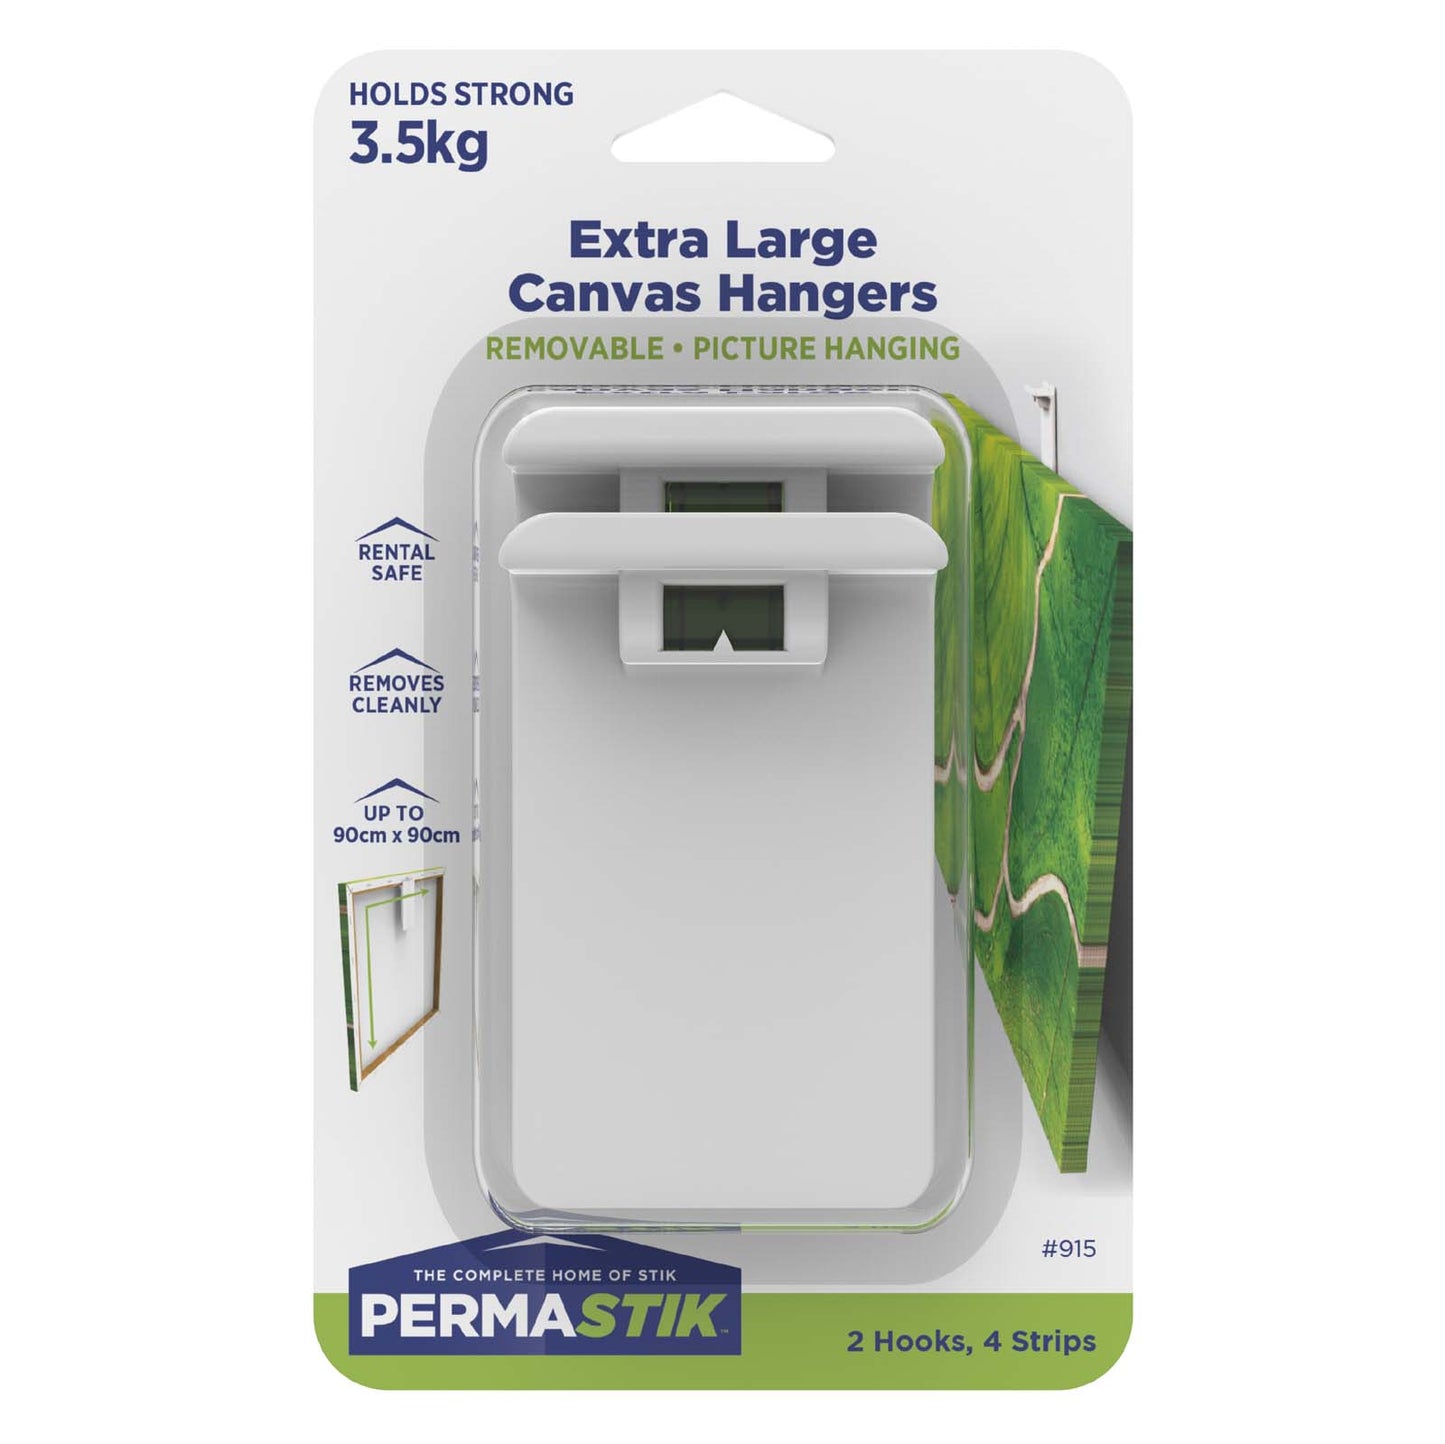 Extra Large Canvas Hangers - 2 Pack